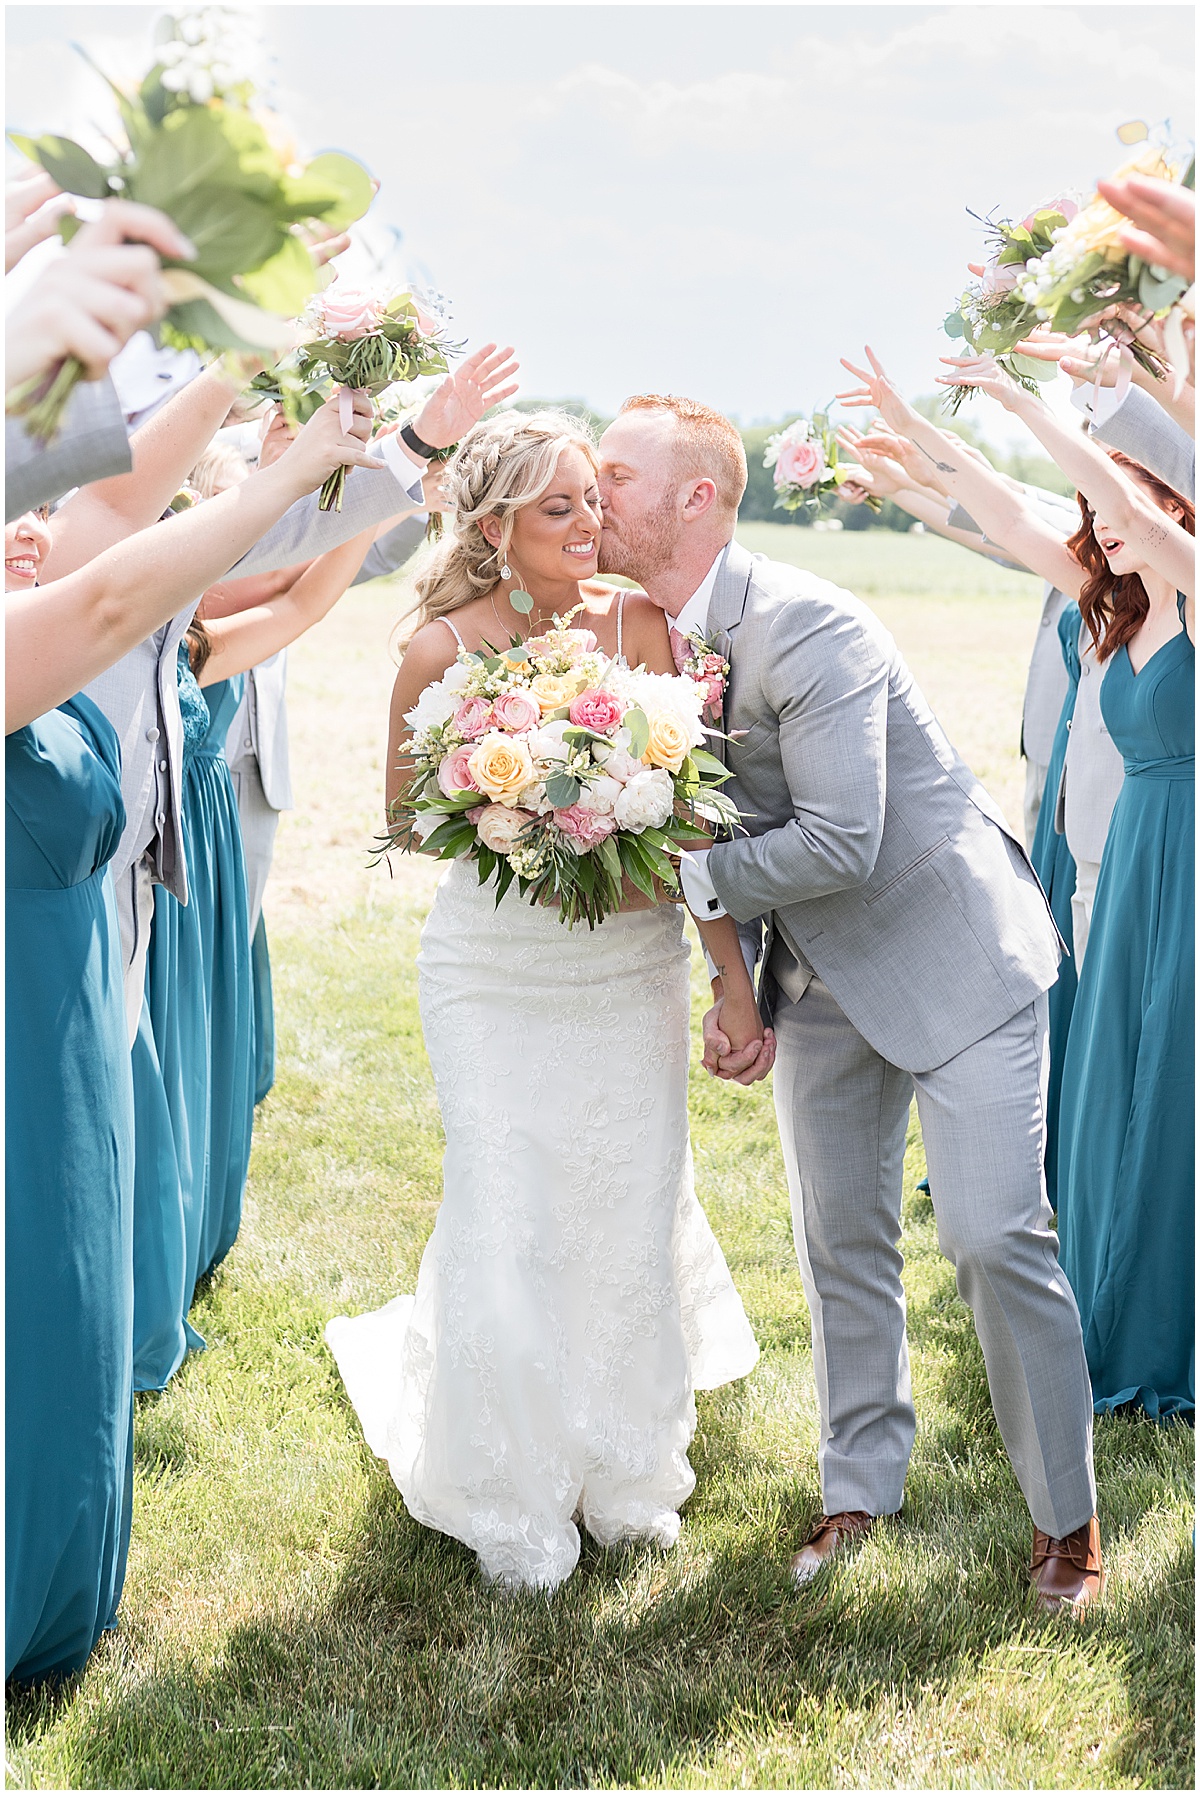 Bridal party celebrates couple before wedding at New Journey Farms in Lafayette, Indiana